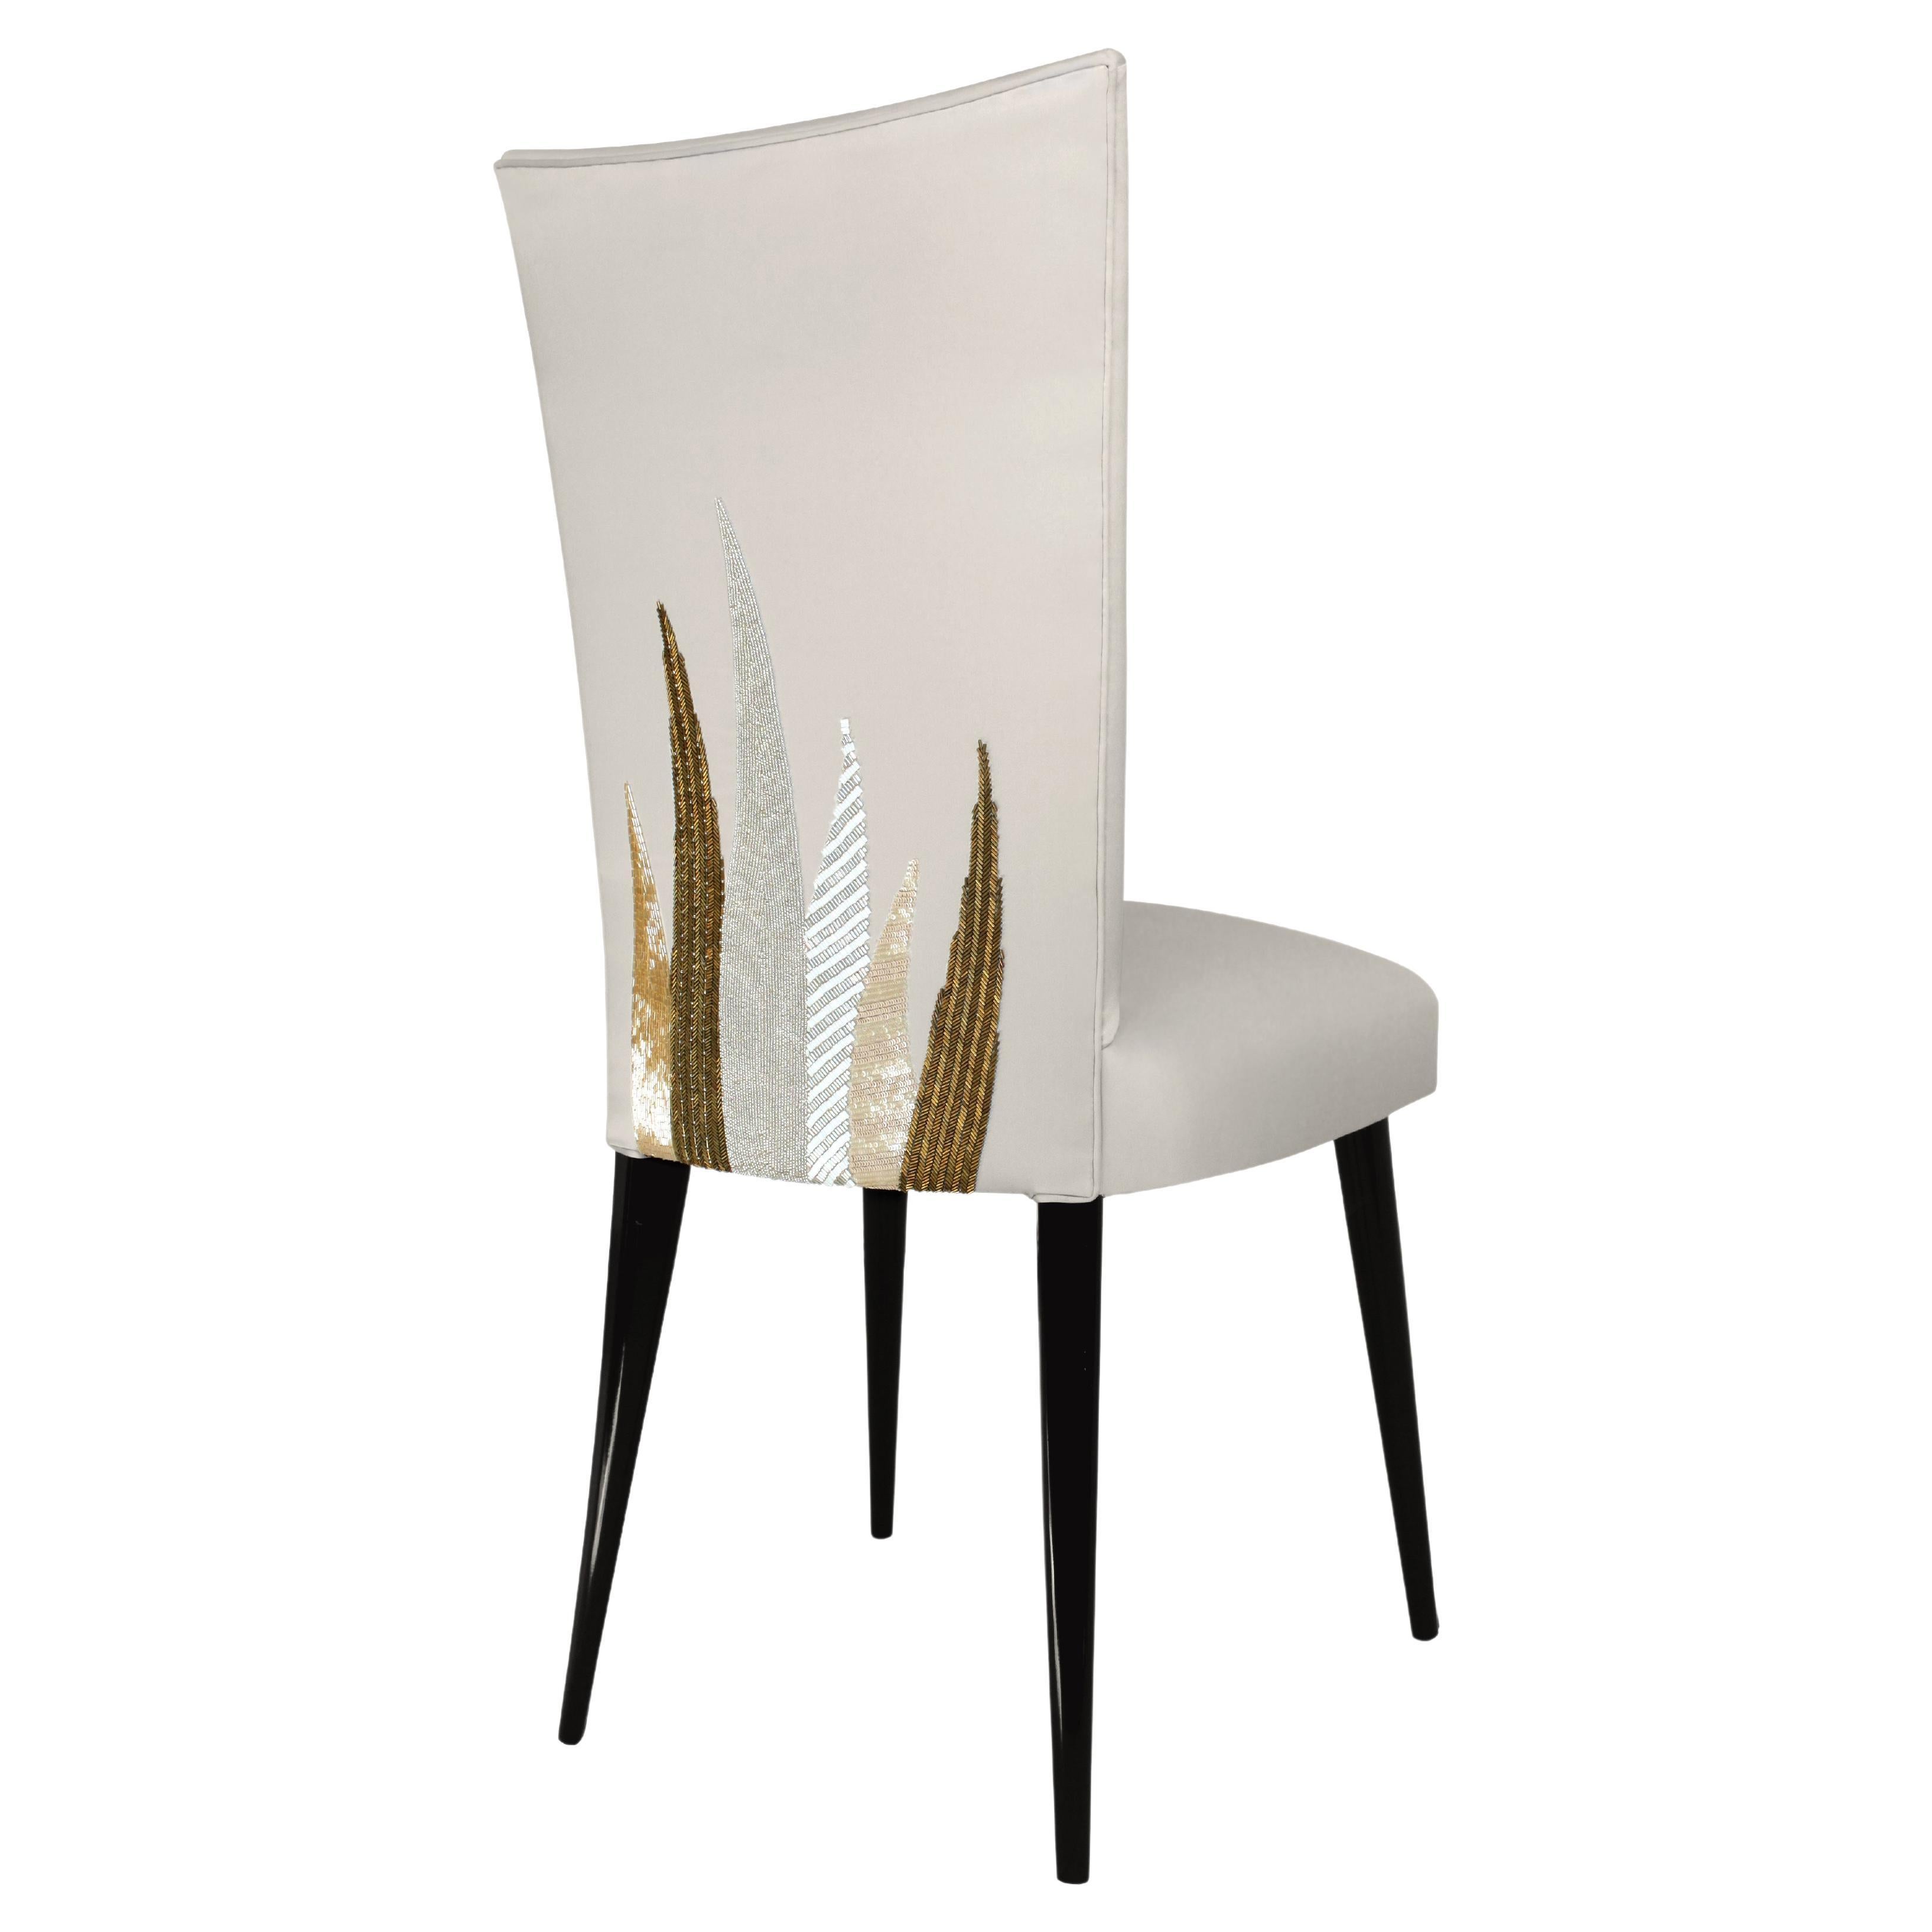 Aiveen Daly Agave Stiletto Chair  For Sale